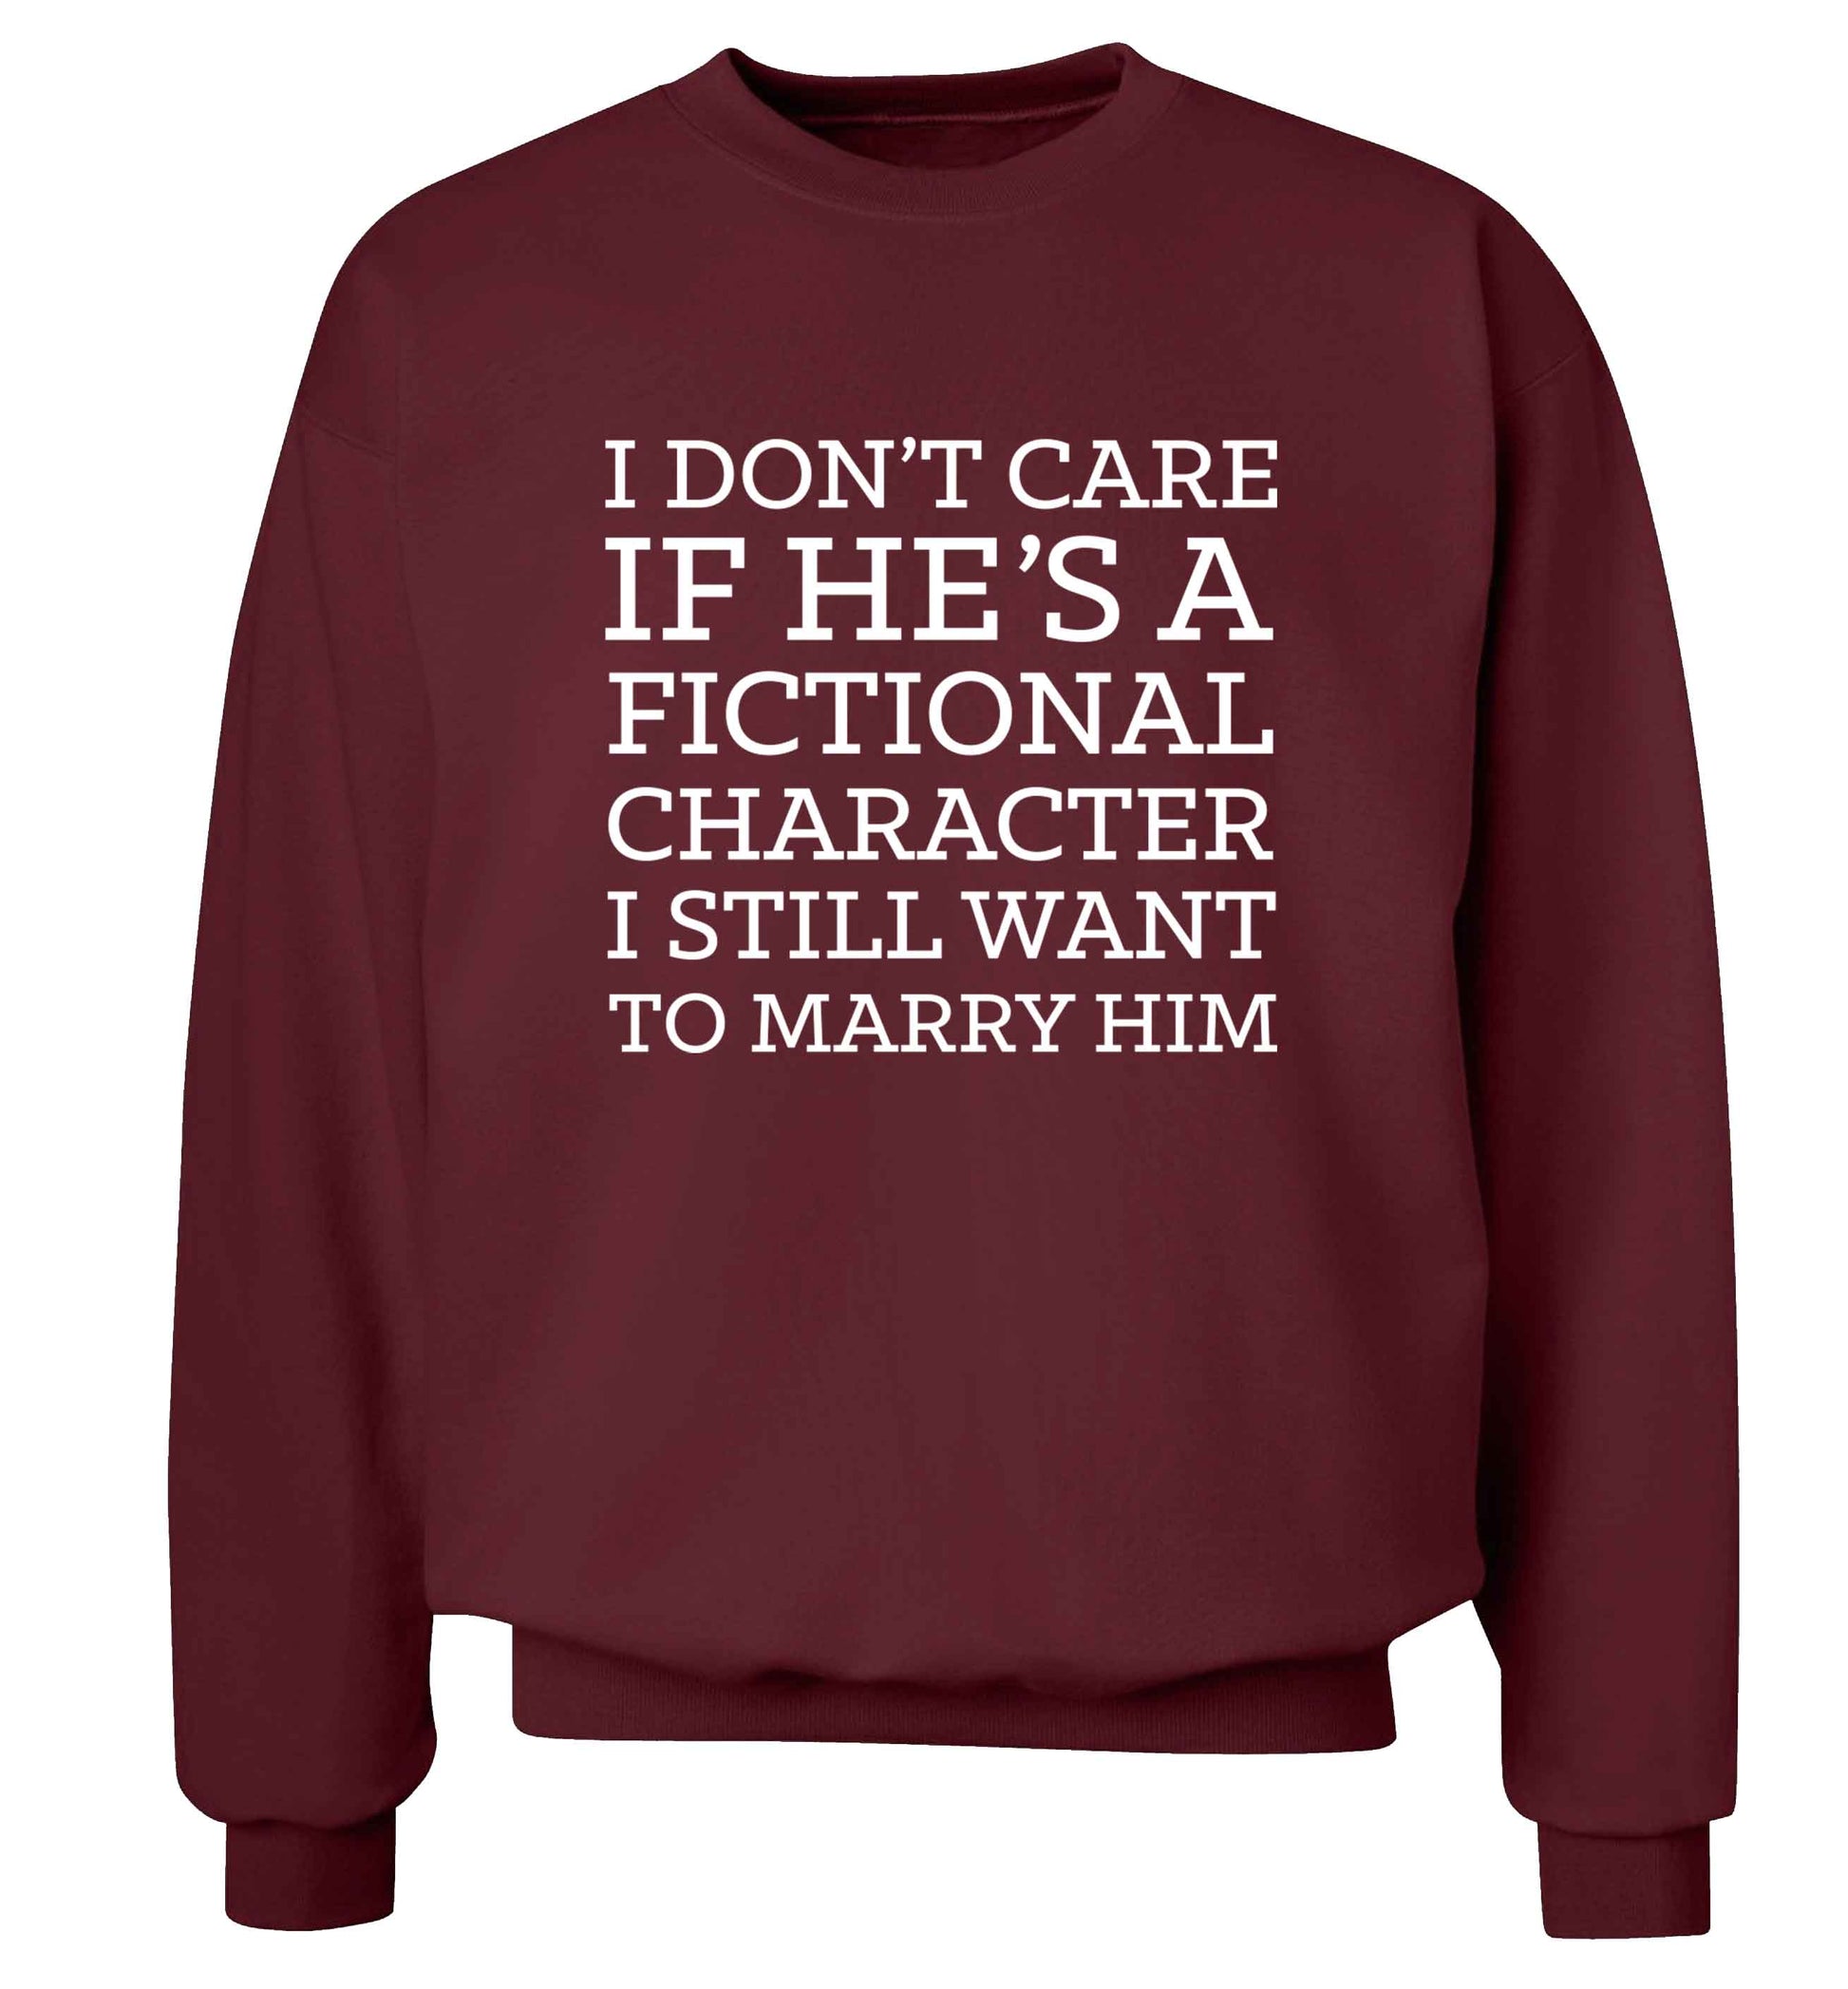 I don't care if he's a fictional character I still want to marry him adult's unisex maroon sweater 2XL